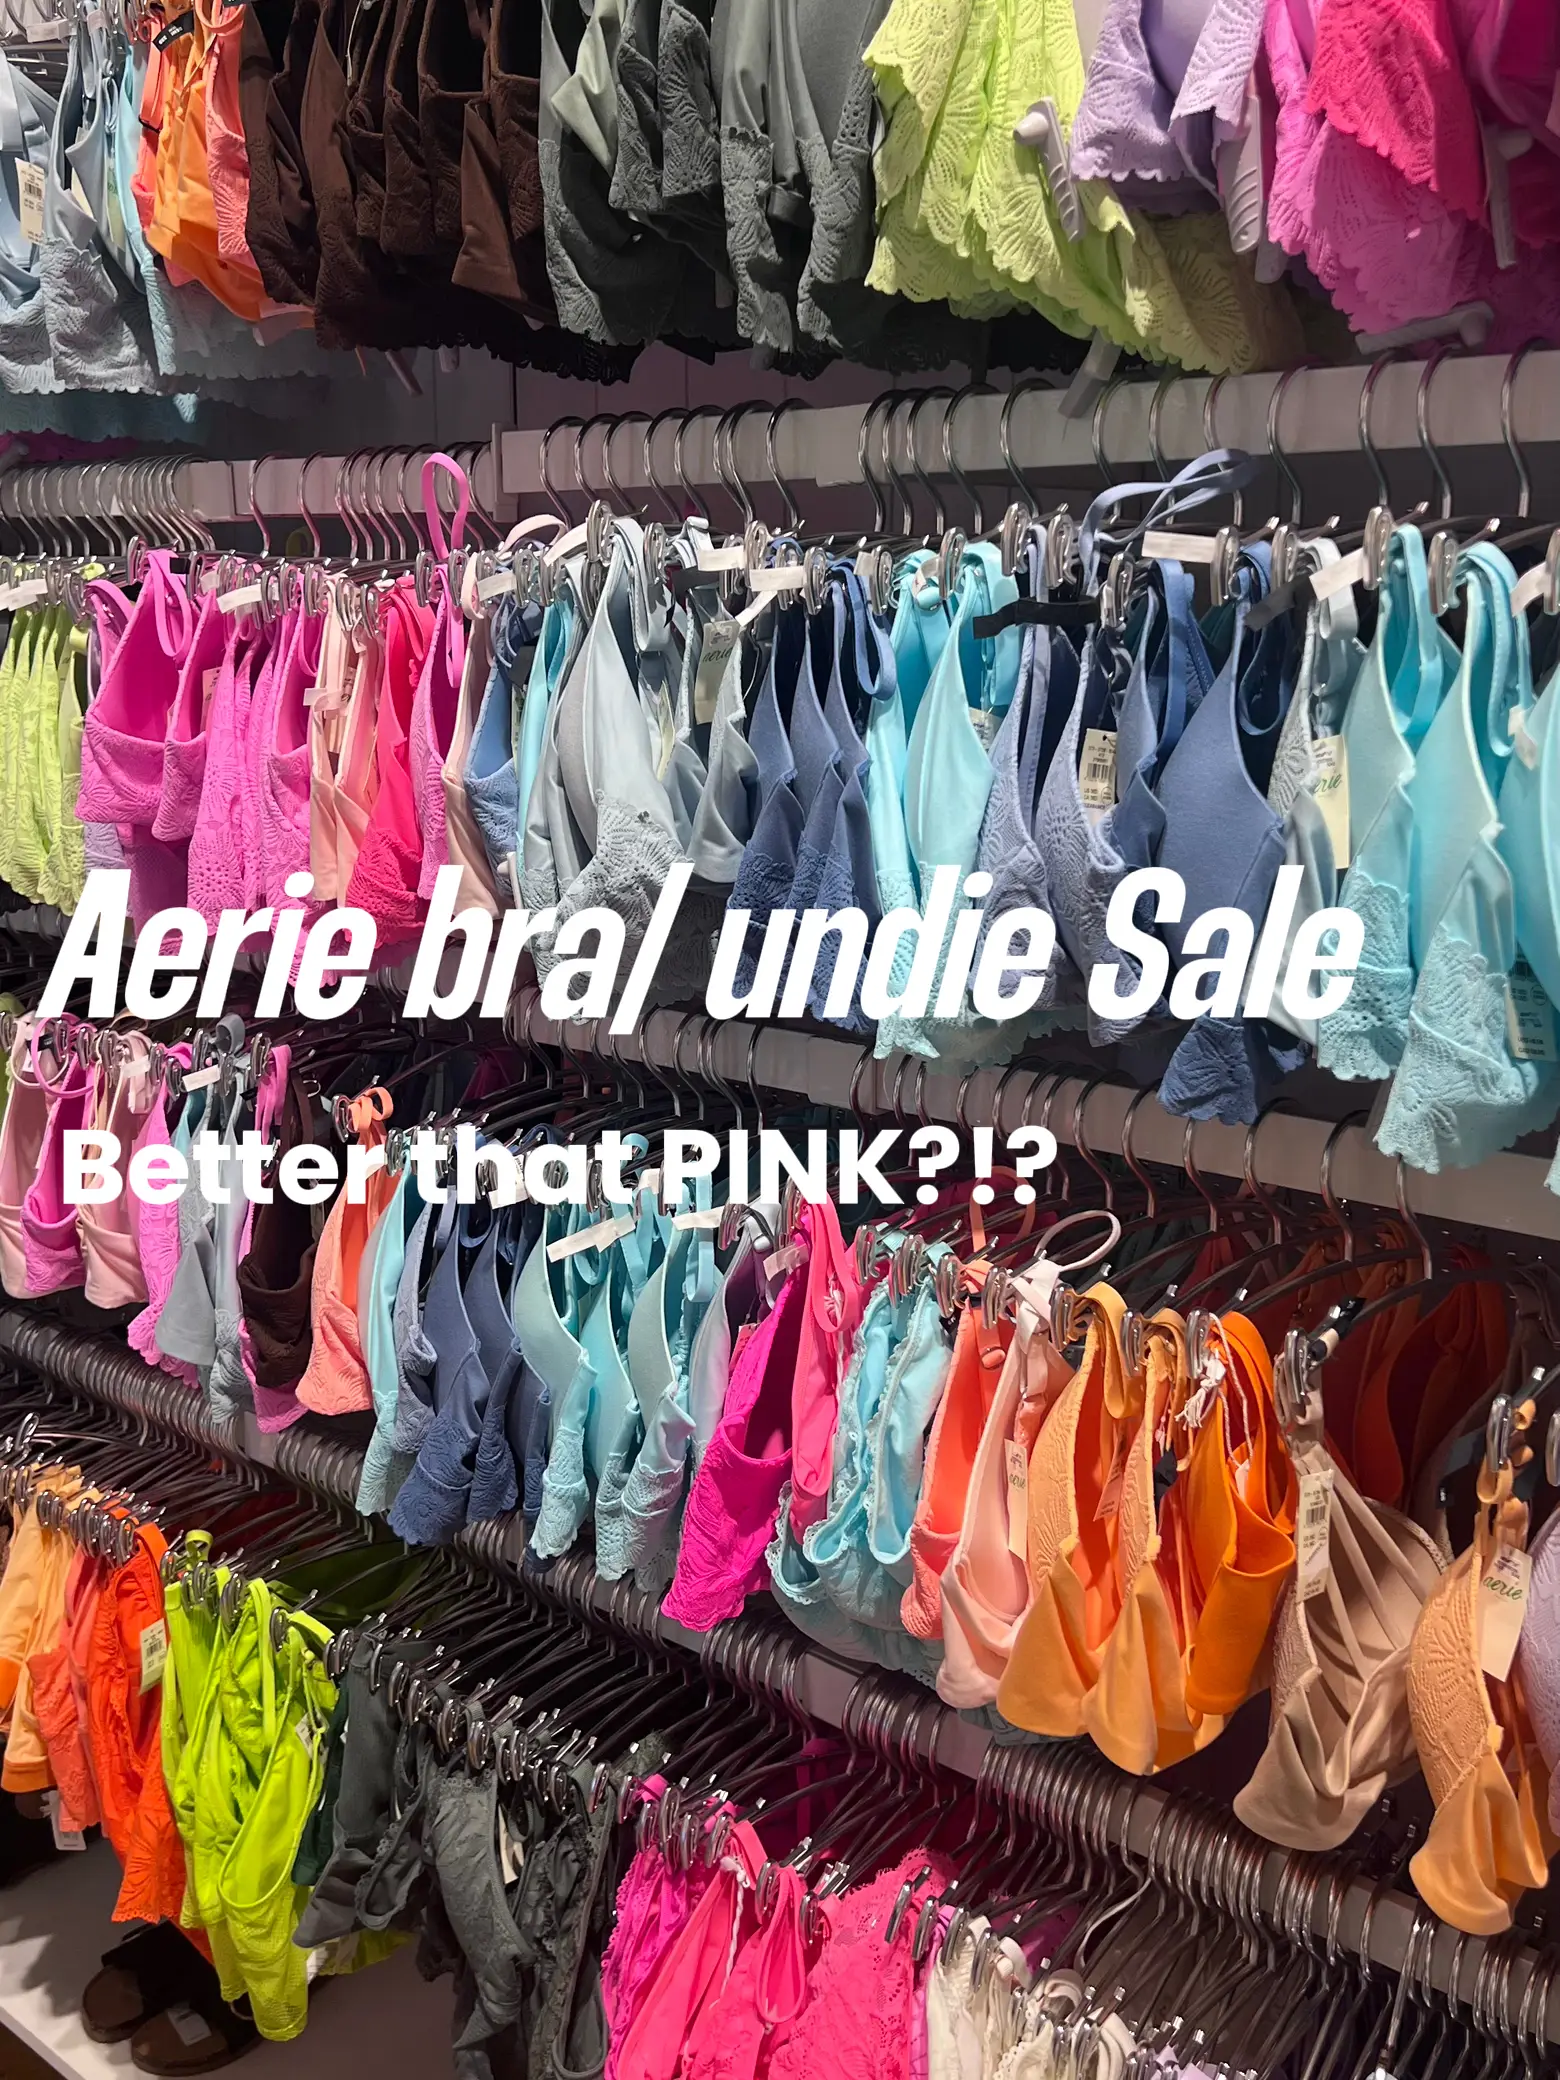 Better undies for less?!? PINK CANCELED